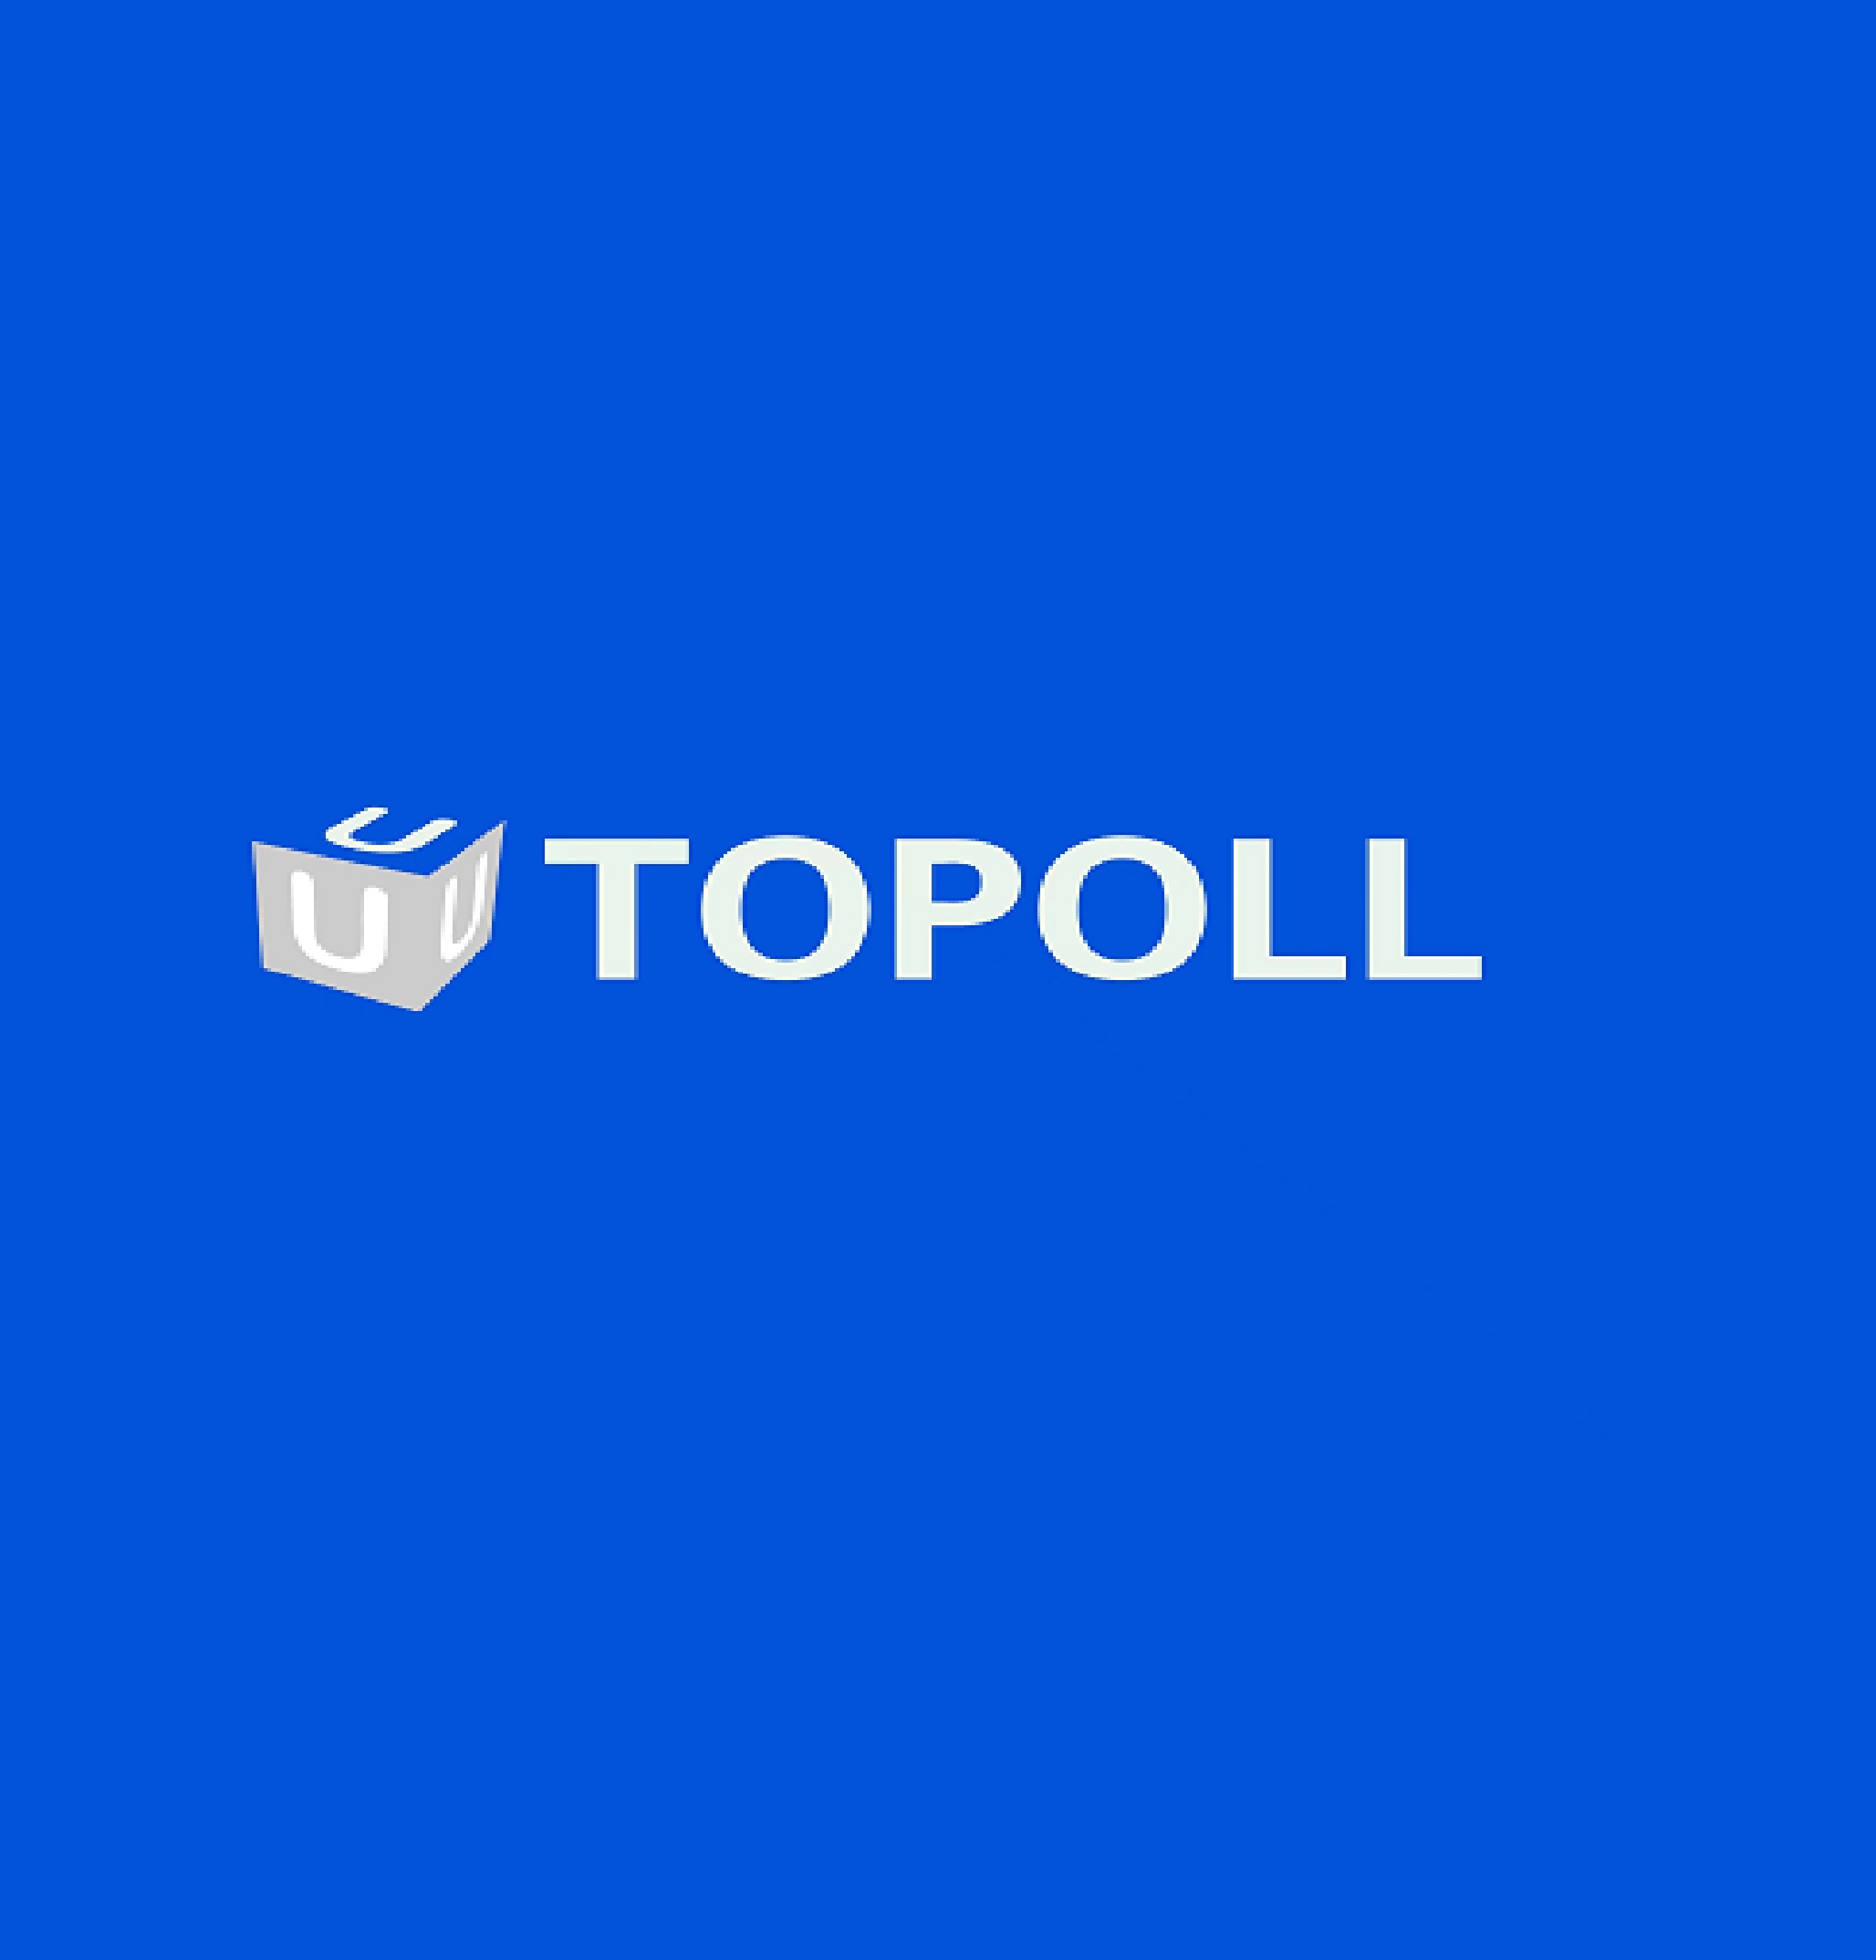 The UtoPoll Dapp is your ticket to Utopia!